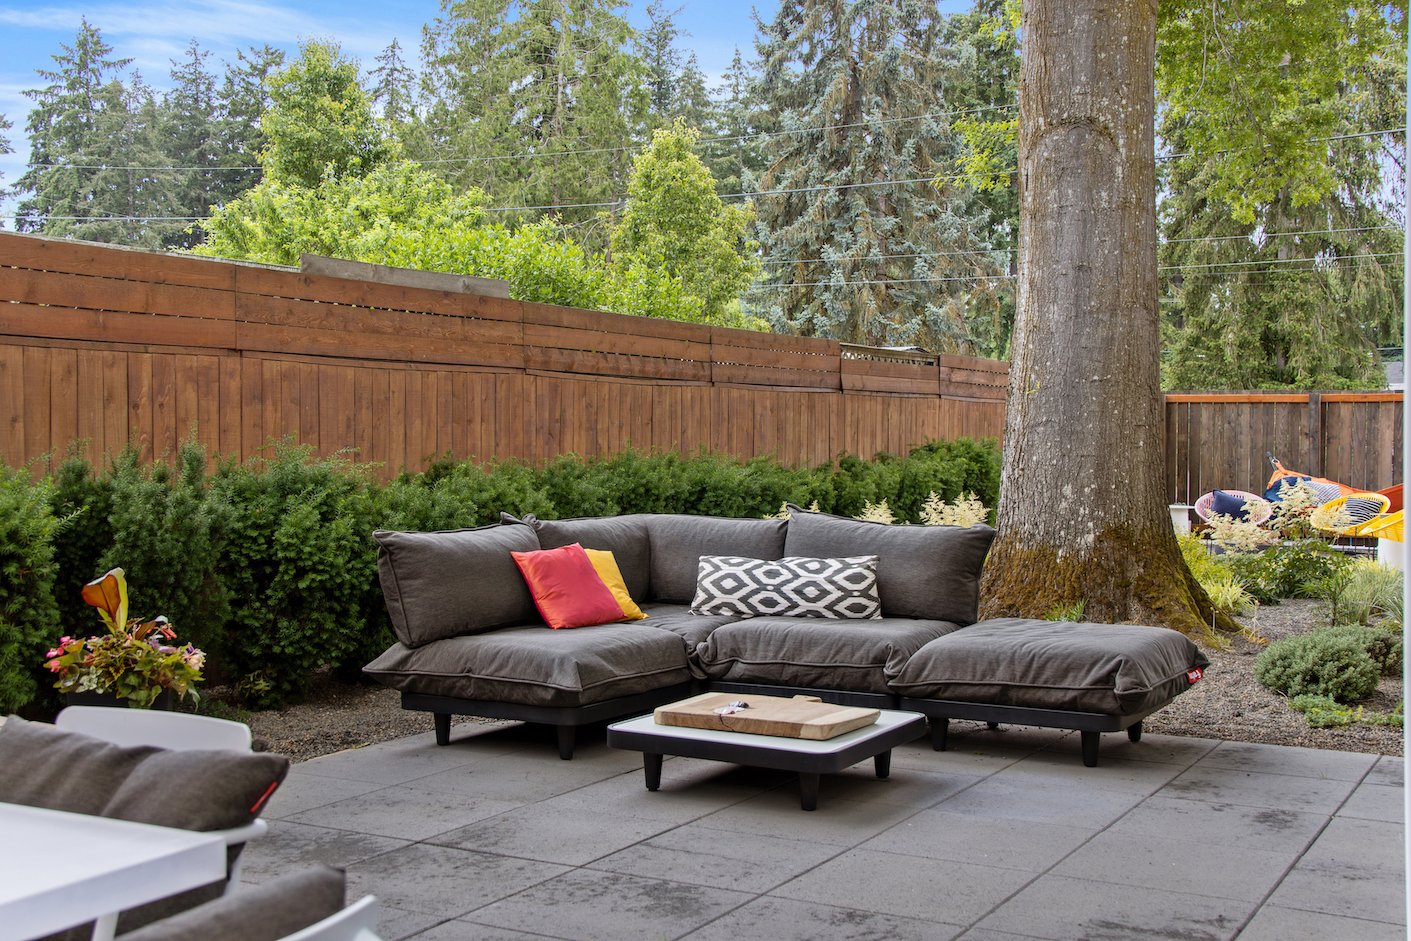 Outdoor Living in the Forest - Grasstains Landscaping